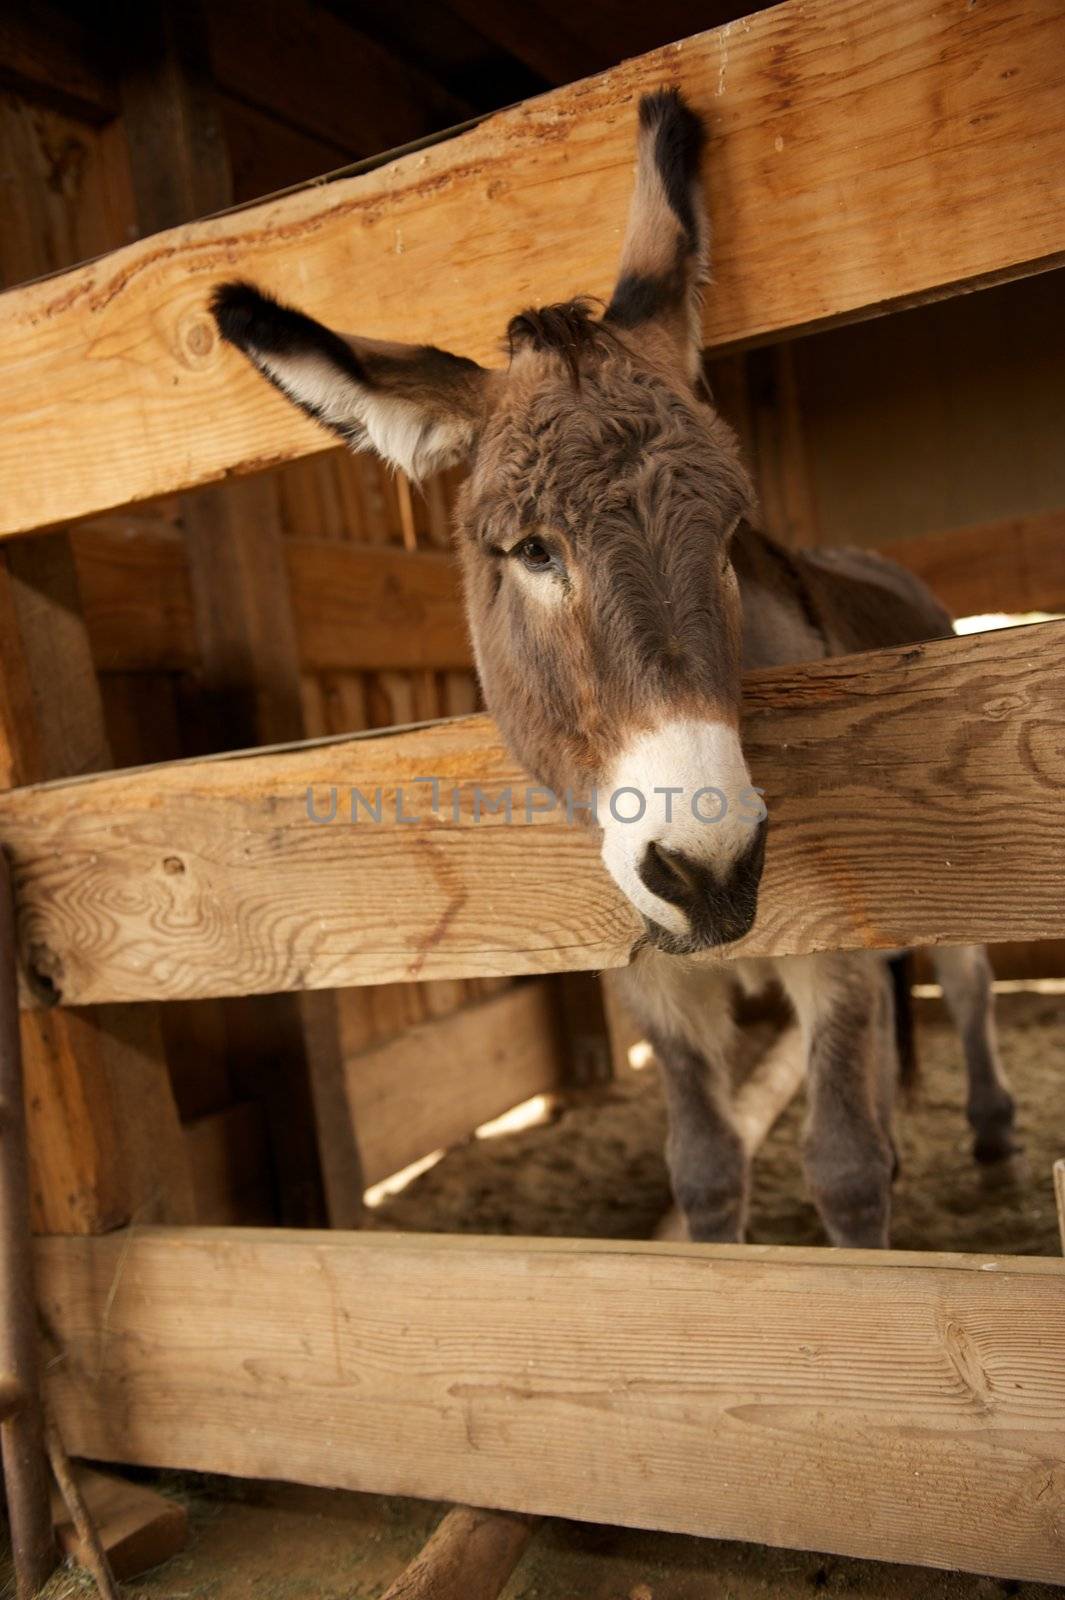 Lonely donkey in his pen puts his head through the wooden slats